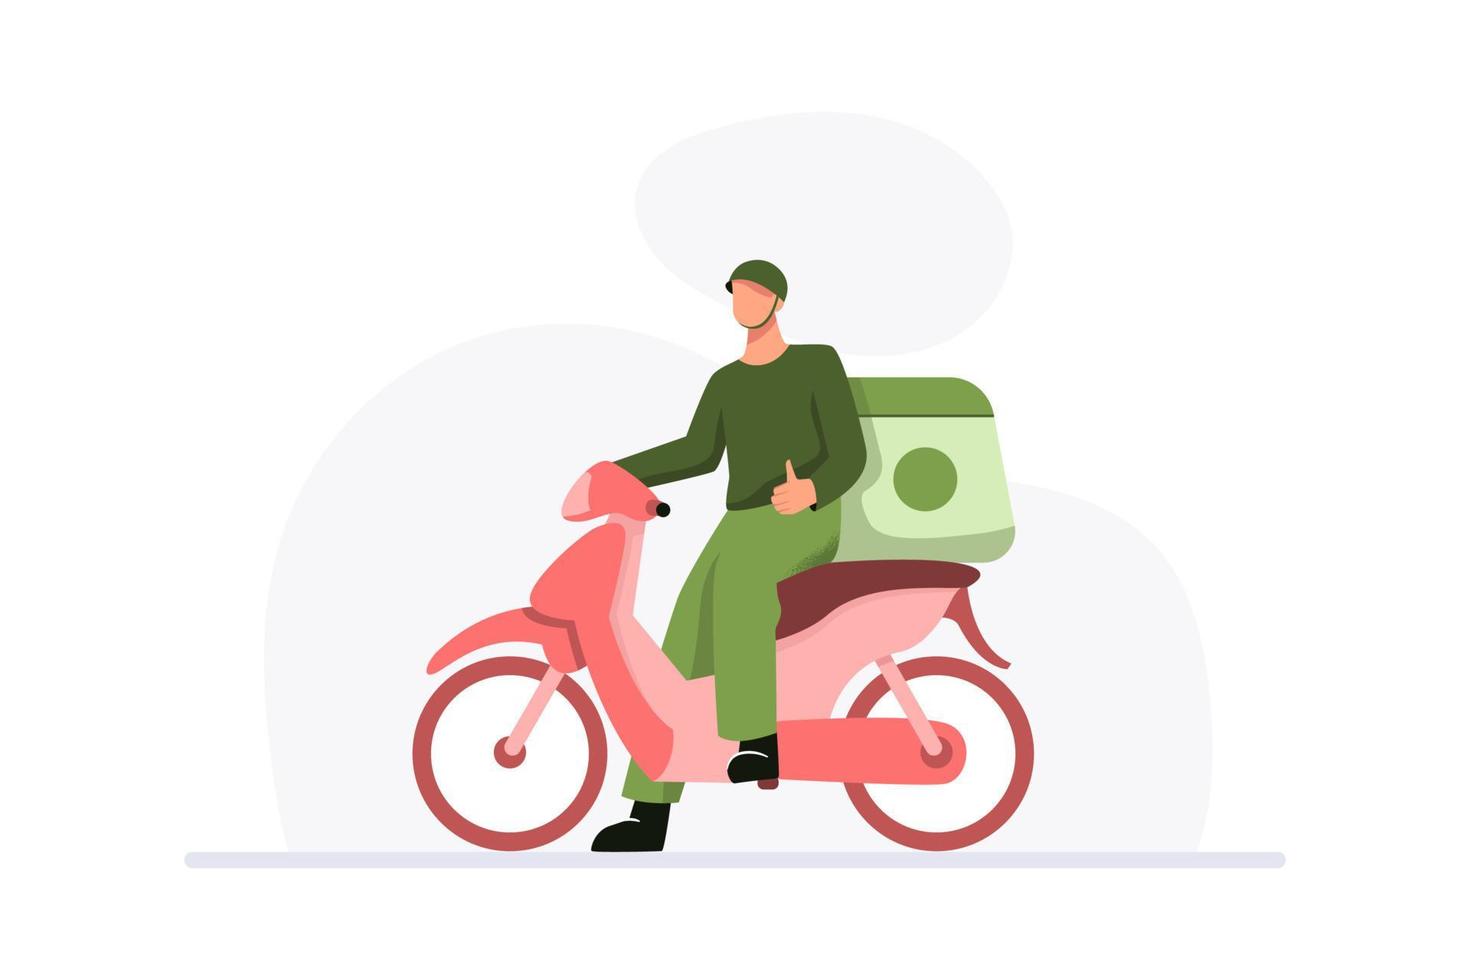 Food delivery service concept with staff using motorcycle and showing thumbs up vector